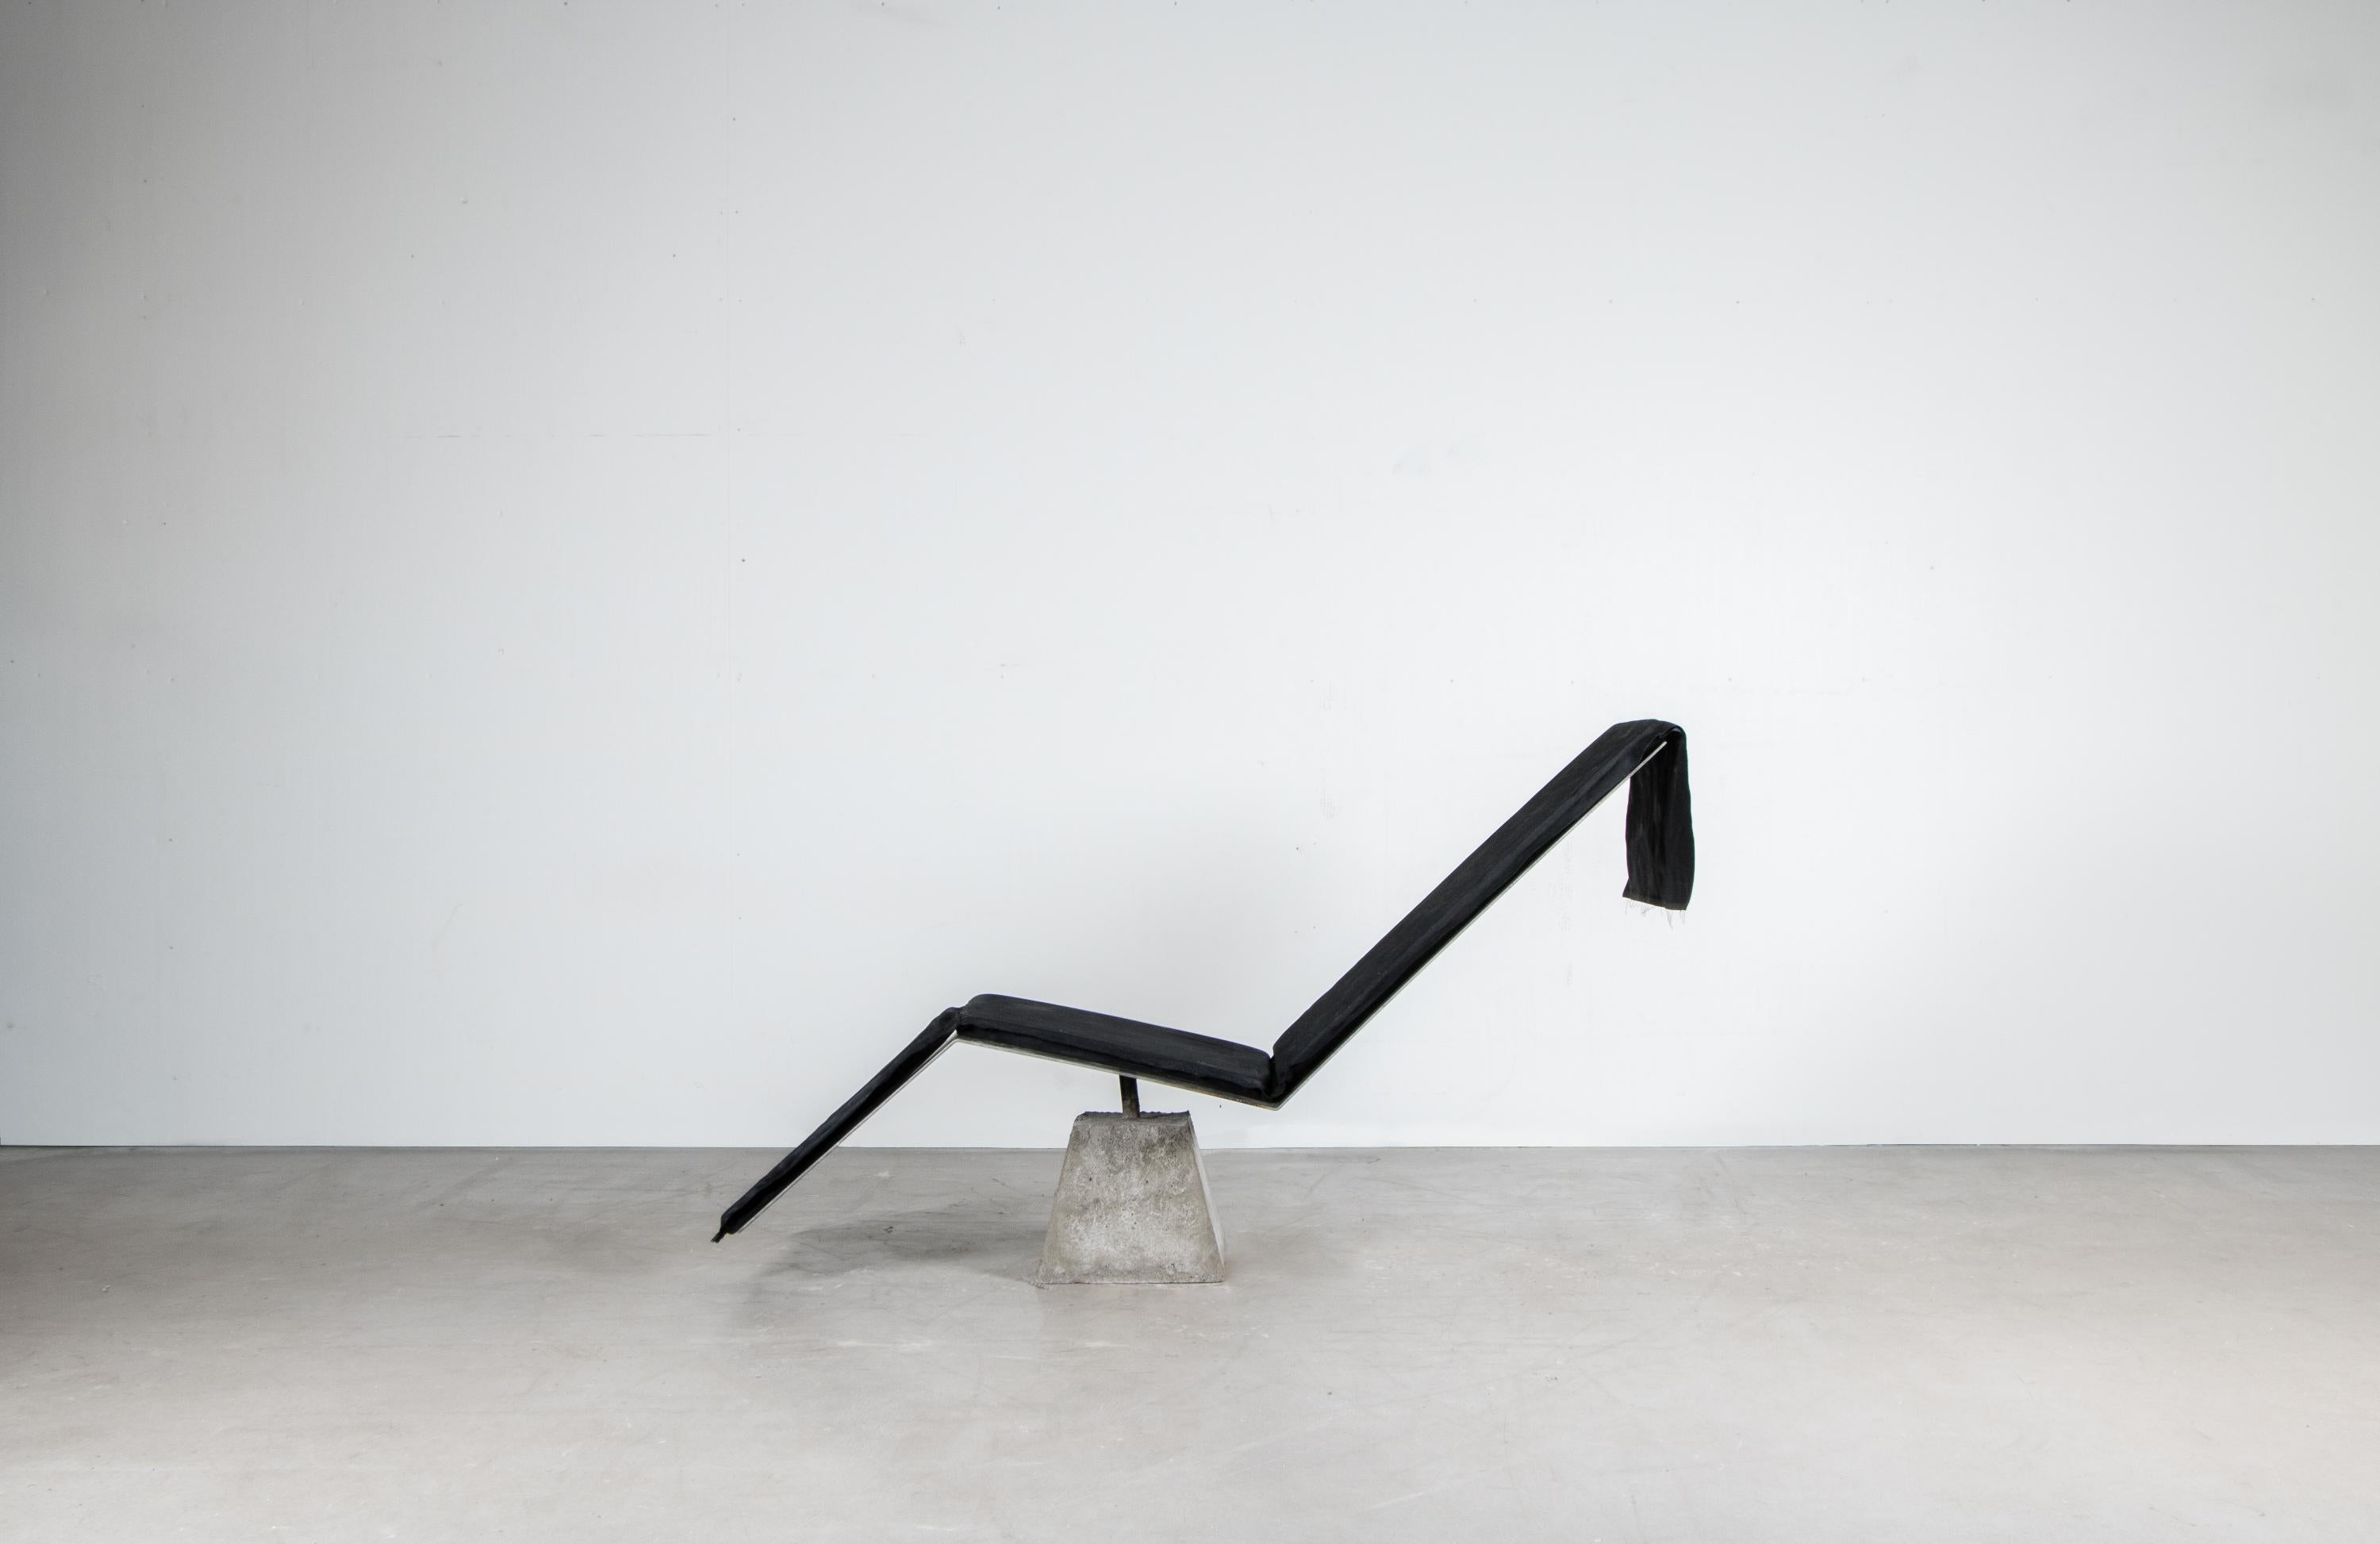 Flykt chair by Lucas Morten
2020
Limited edition of 17
Dimensions: 150 H 83 W 50 cm
Material: Concrete, burned waxed steel and hand-waxed upholstered cushion

With the vision to build a monument for escapism, flykt chair was sculpted from a concrete